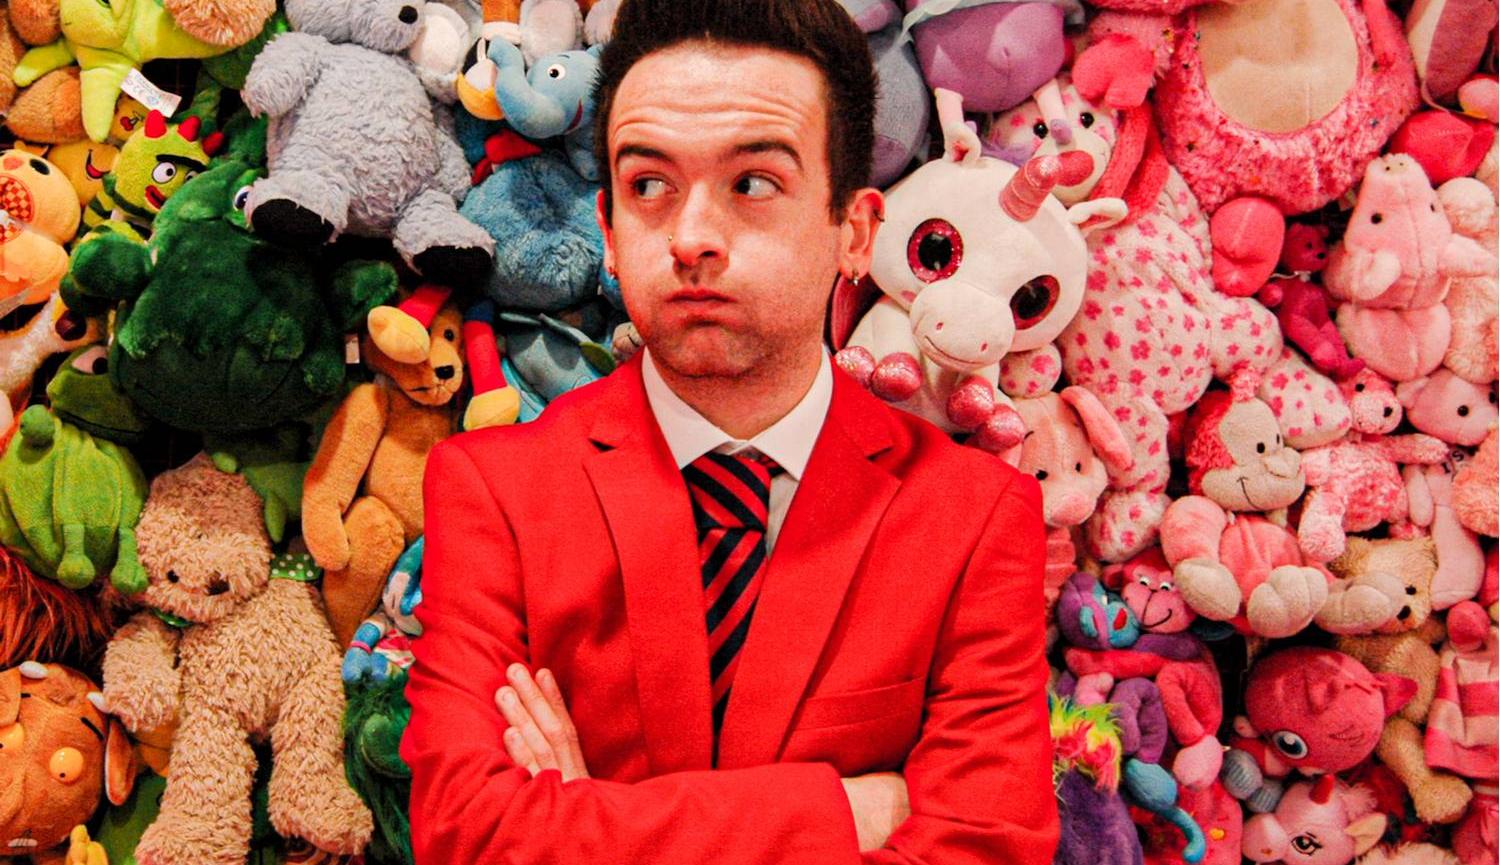 Lewis wearing his Redcoat jacket, standing with arms crossed, standing in front of a pile of soft toys